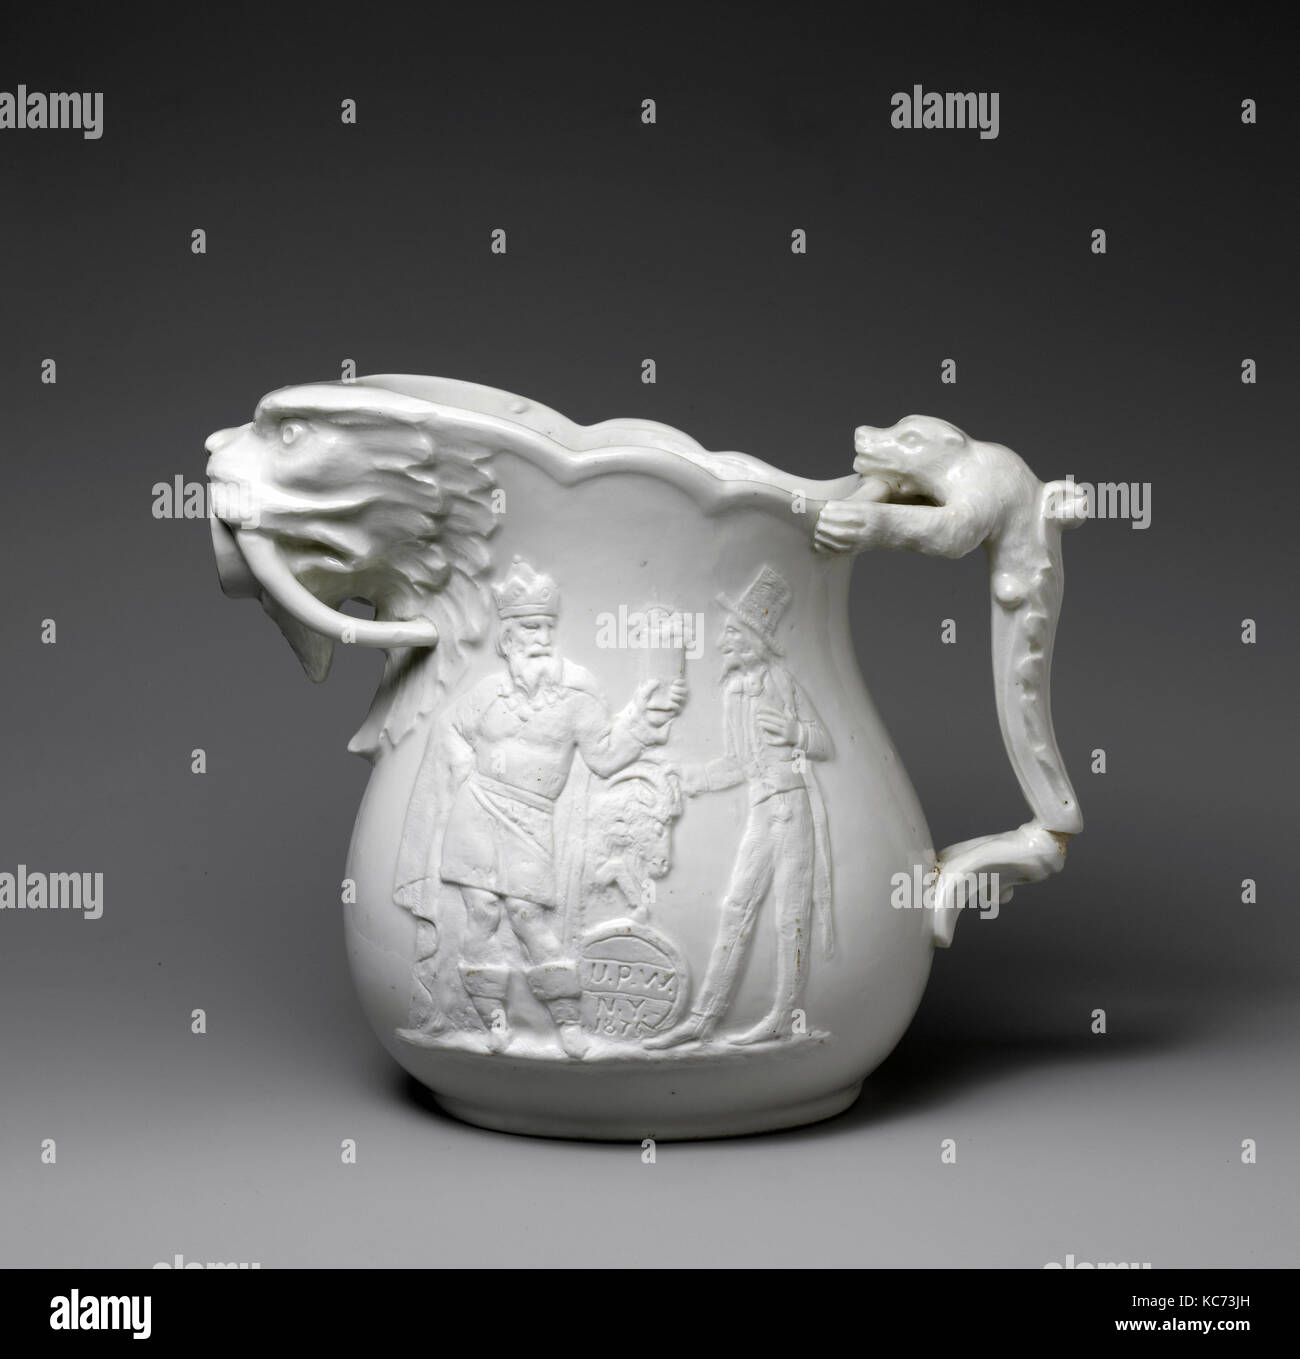 Pitcher, 1875, Made in Brooklyn, New York, United States, American, Porcelain, H. 9 1/4 in. (23.5 cm), Ceramics, Marked on the Stock Photo